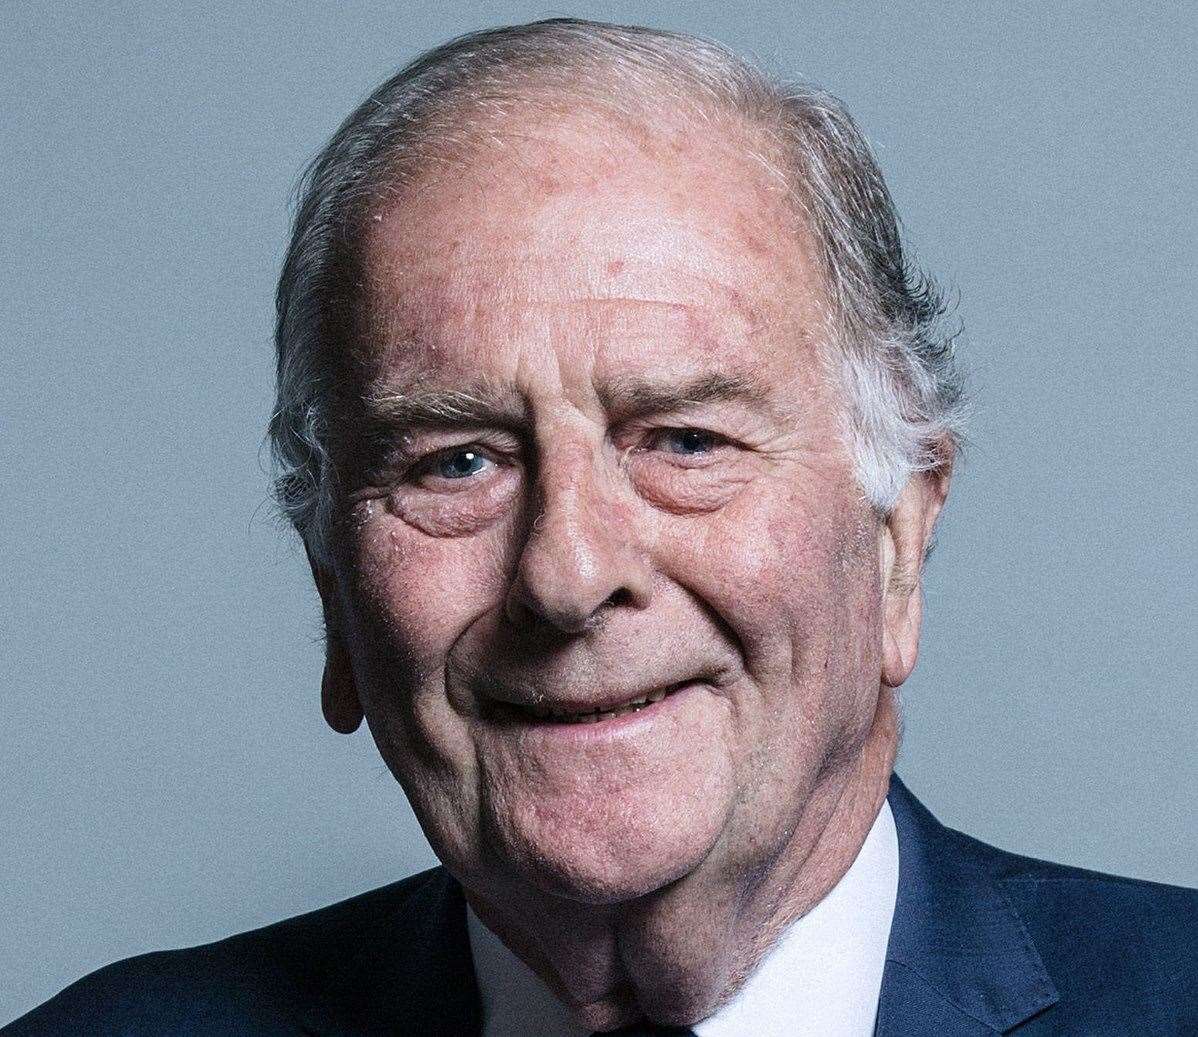 North Thanet MP Sir Roger Gale has issued a stark warning